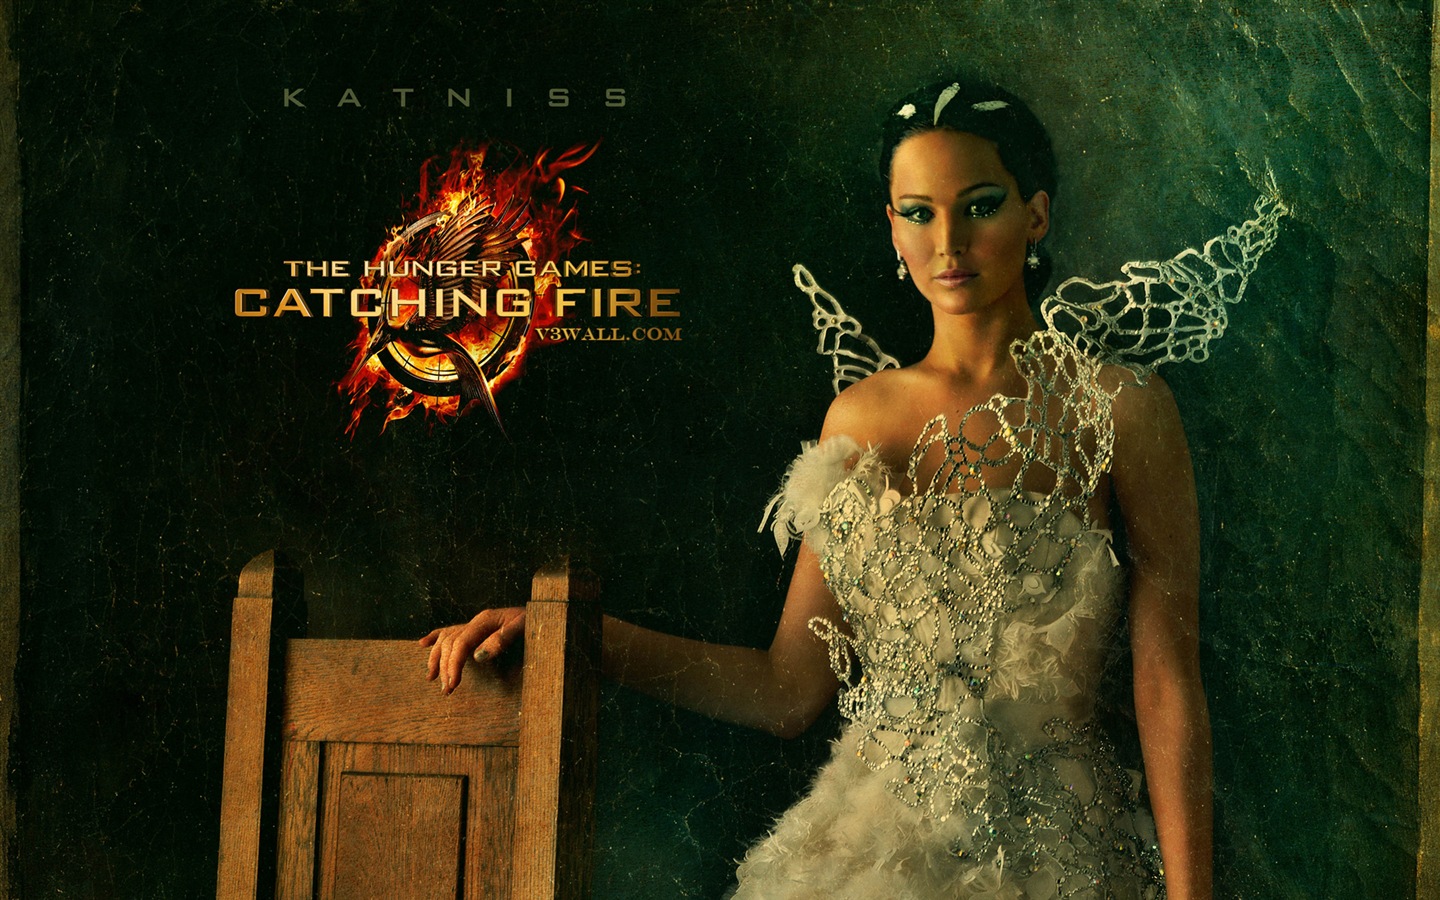 The Hunger Games 2: Catching Fire HD wallpapers #13 - 1440x900